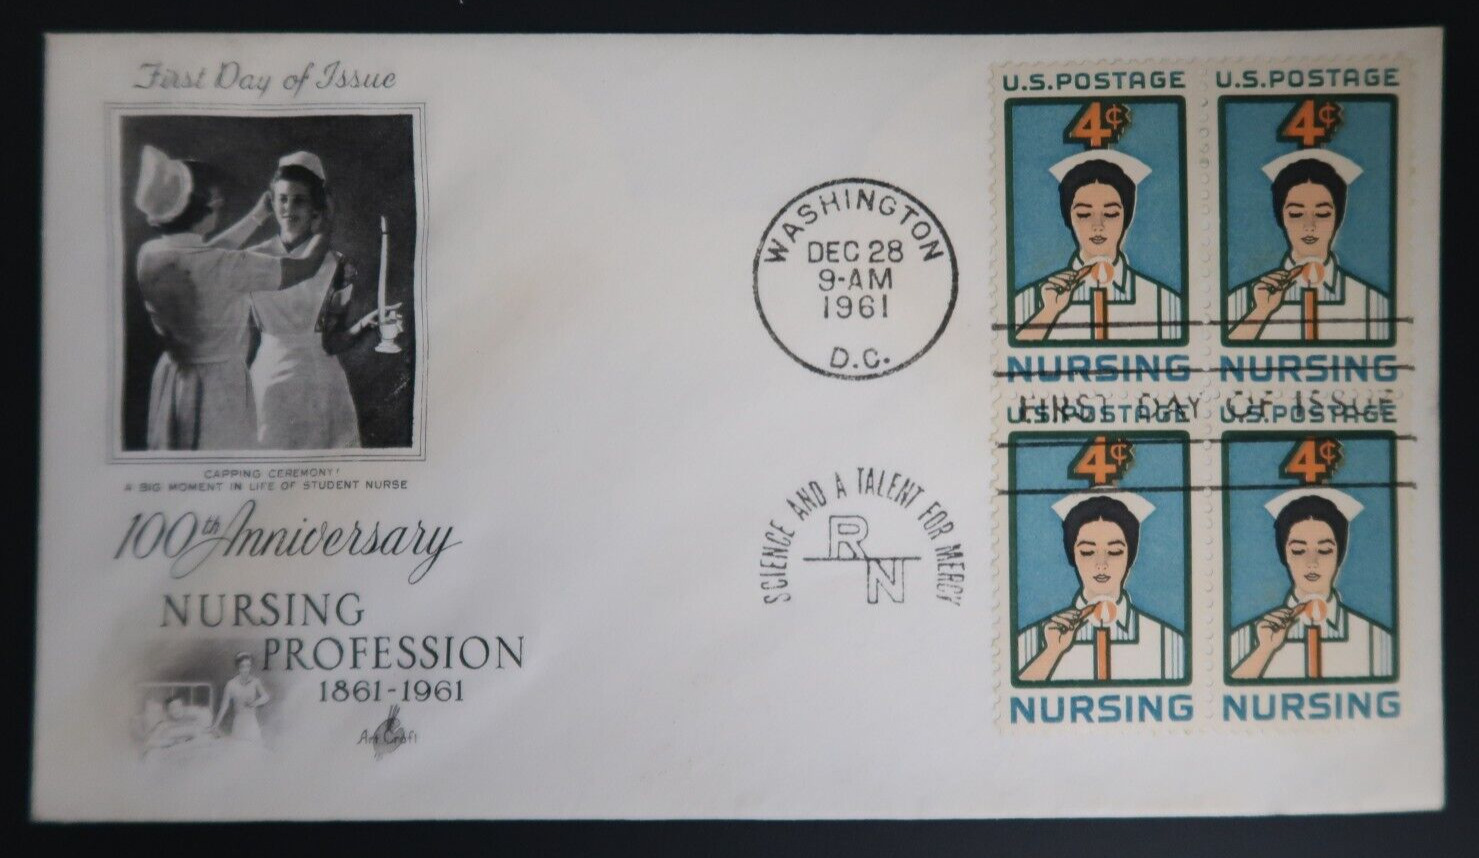 1961 Vintage Envelope 100th Anniversary Nursing Profession First Day of Issue